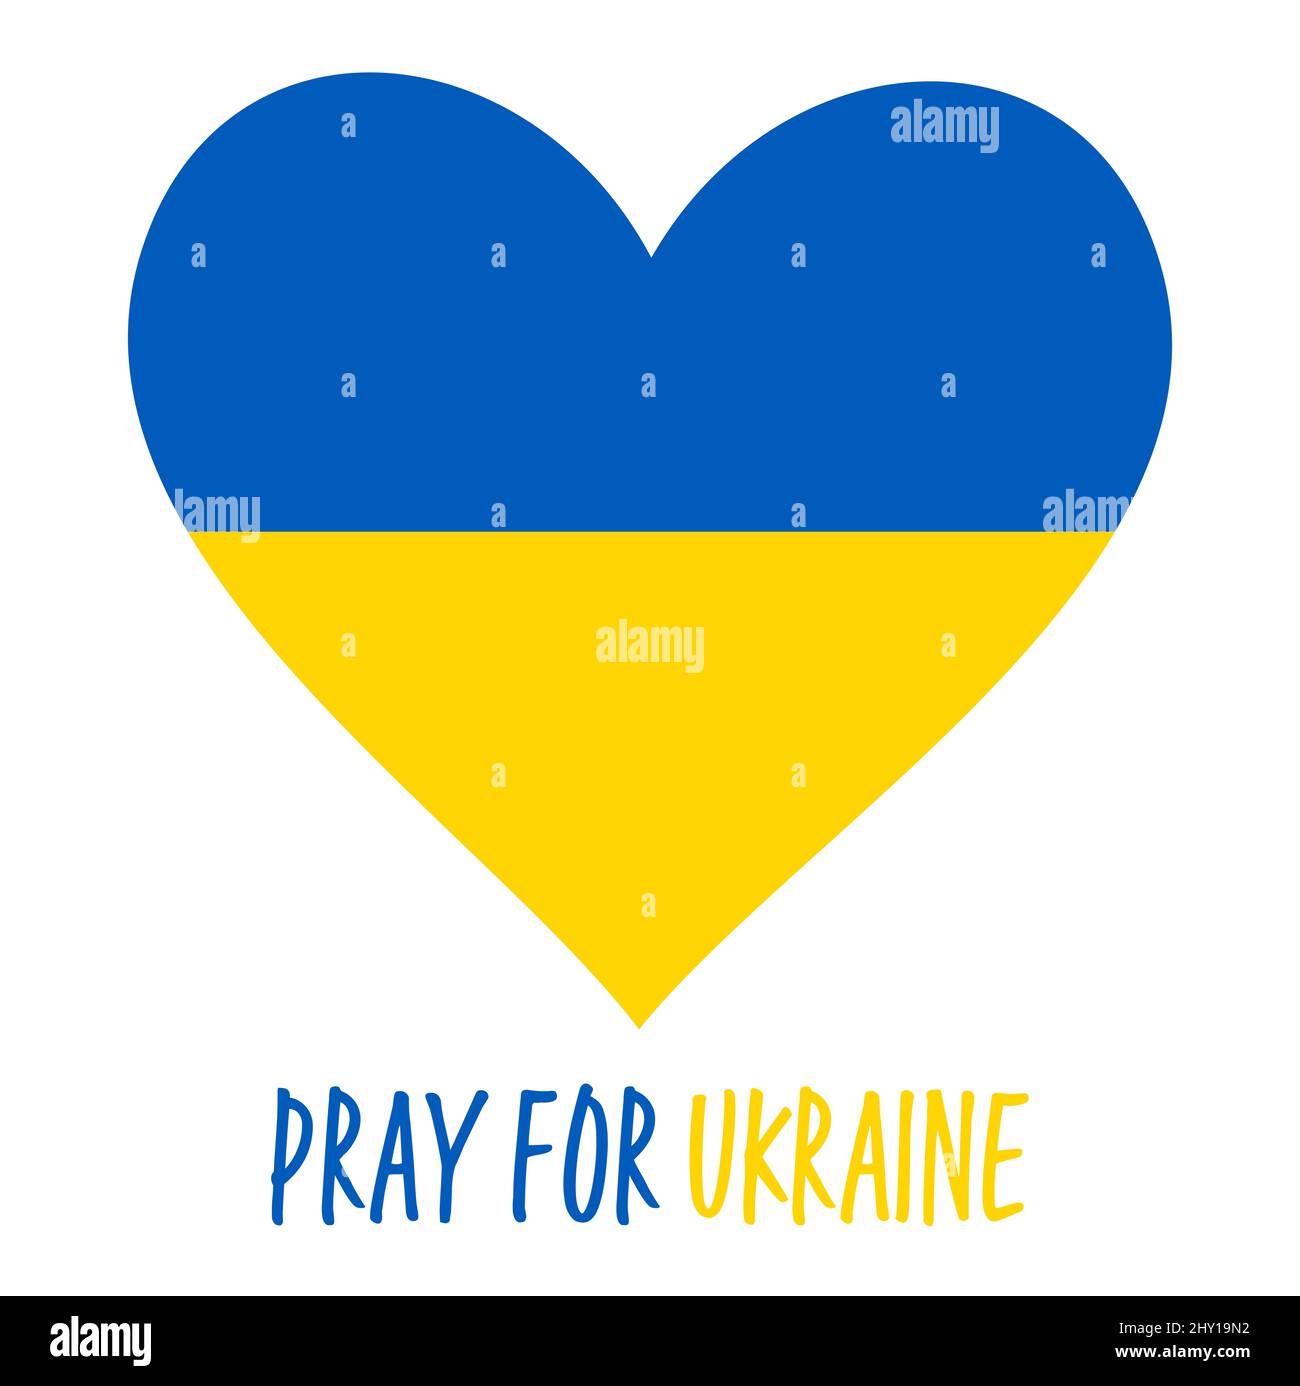 eps vector illustration with country ukraine national colors heart and text pray for ukraine Stock Photo